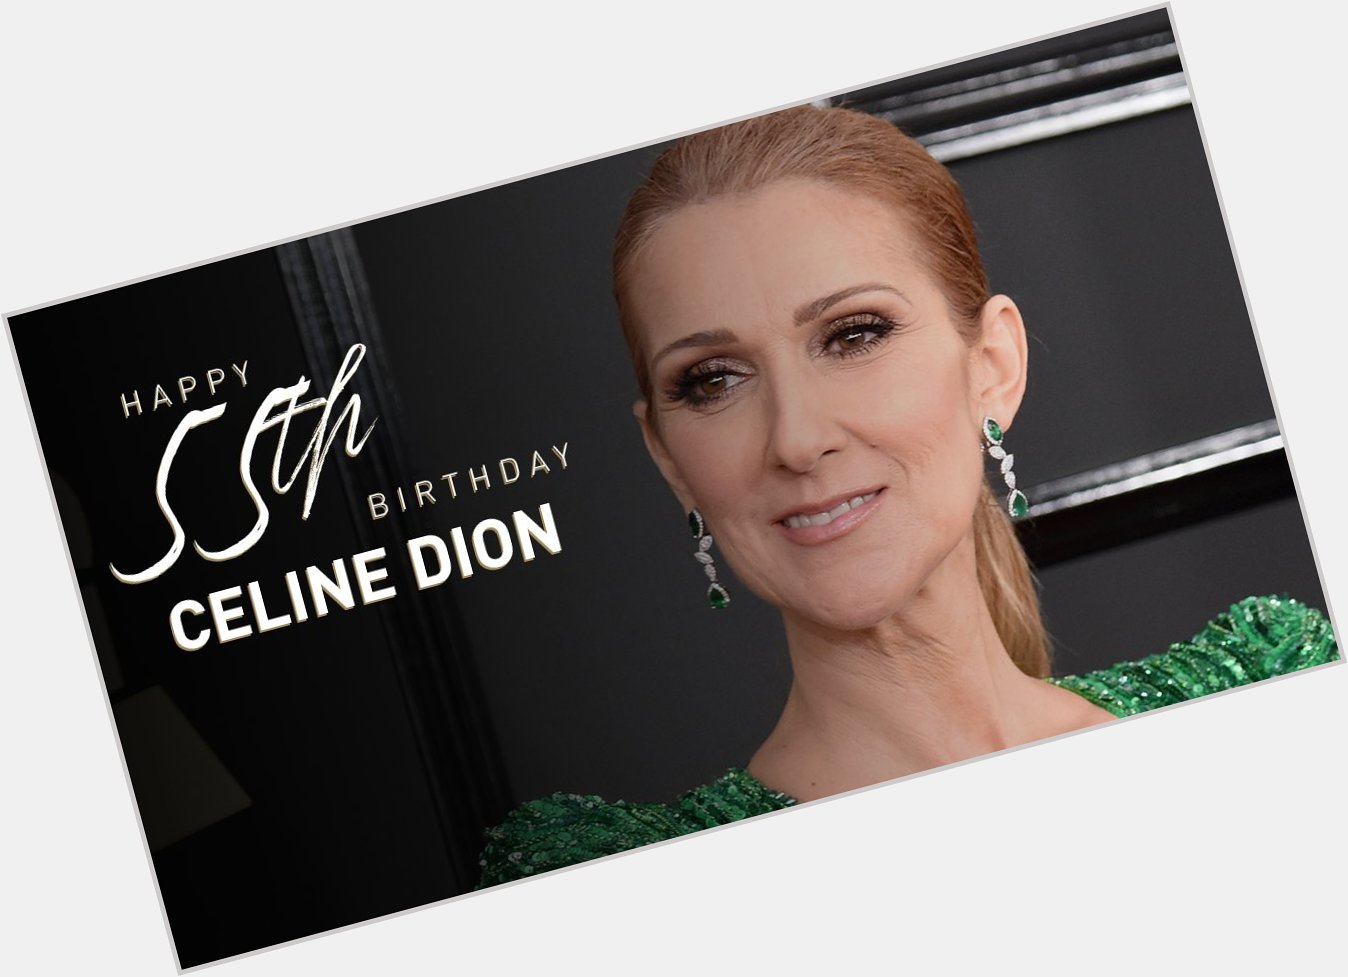 Happy 55th birthday Celine Dion!

Watch her tribute here:  